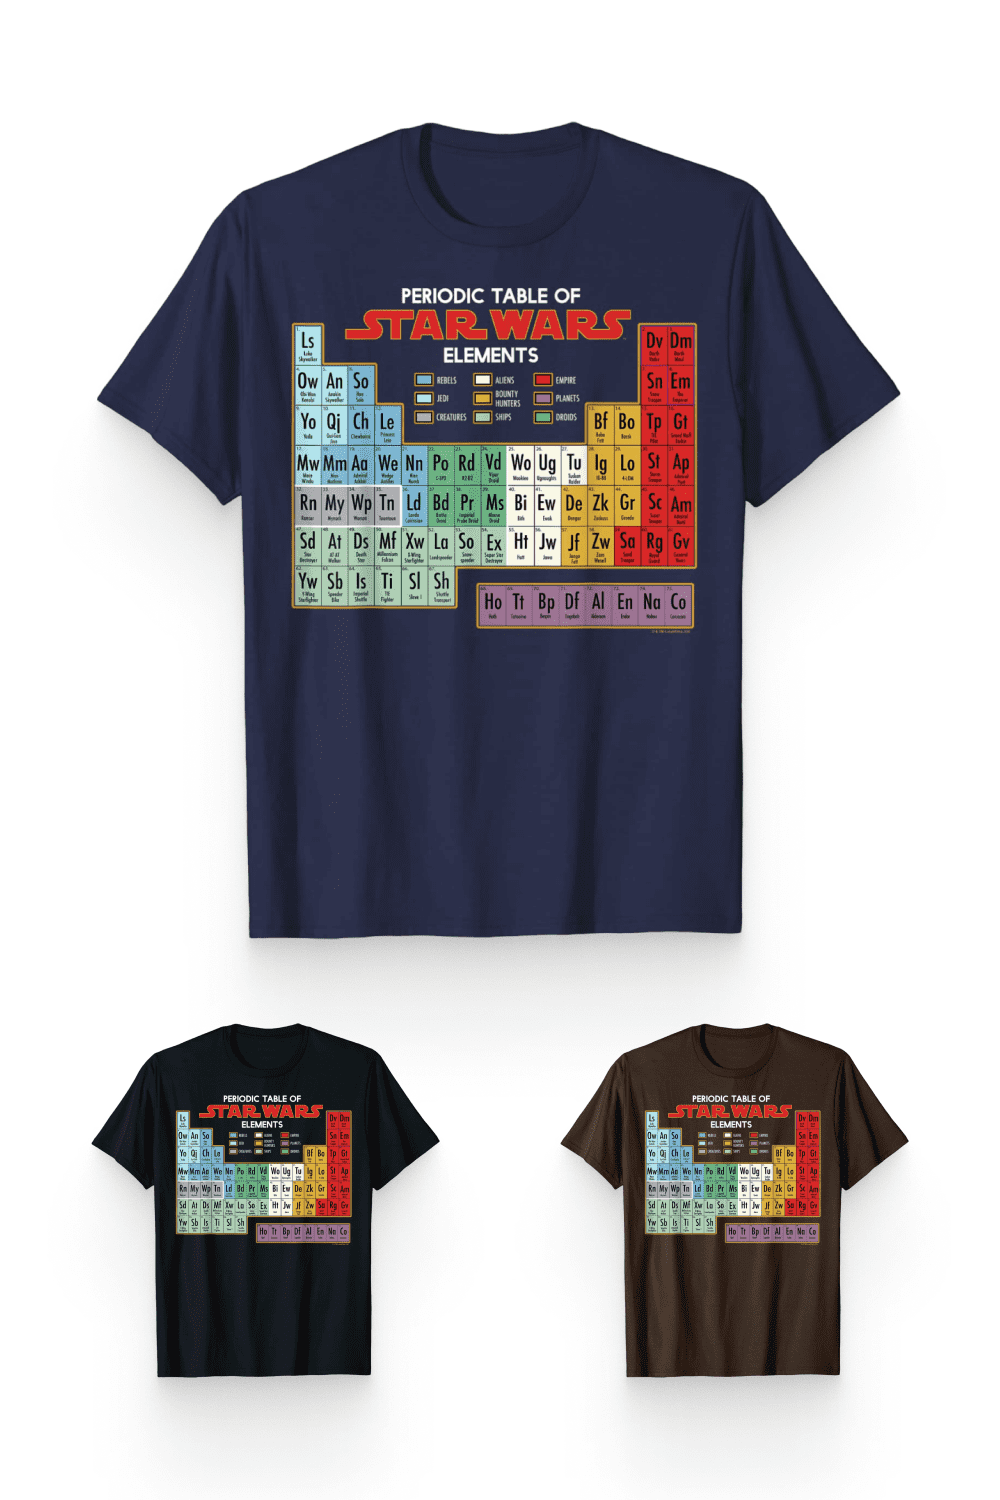 Star Wars Periodic Table of Elements Graphic T-Shirt.